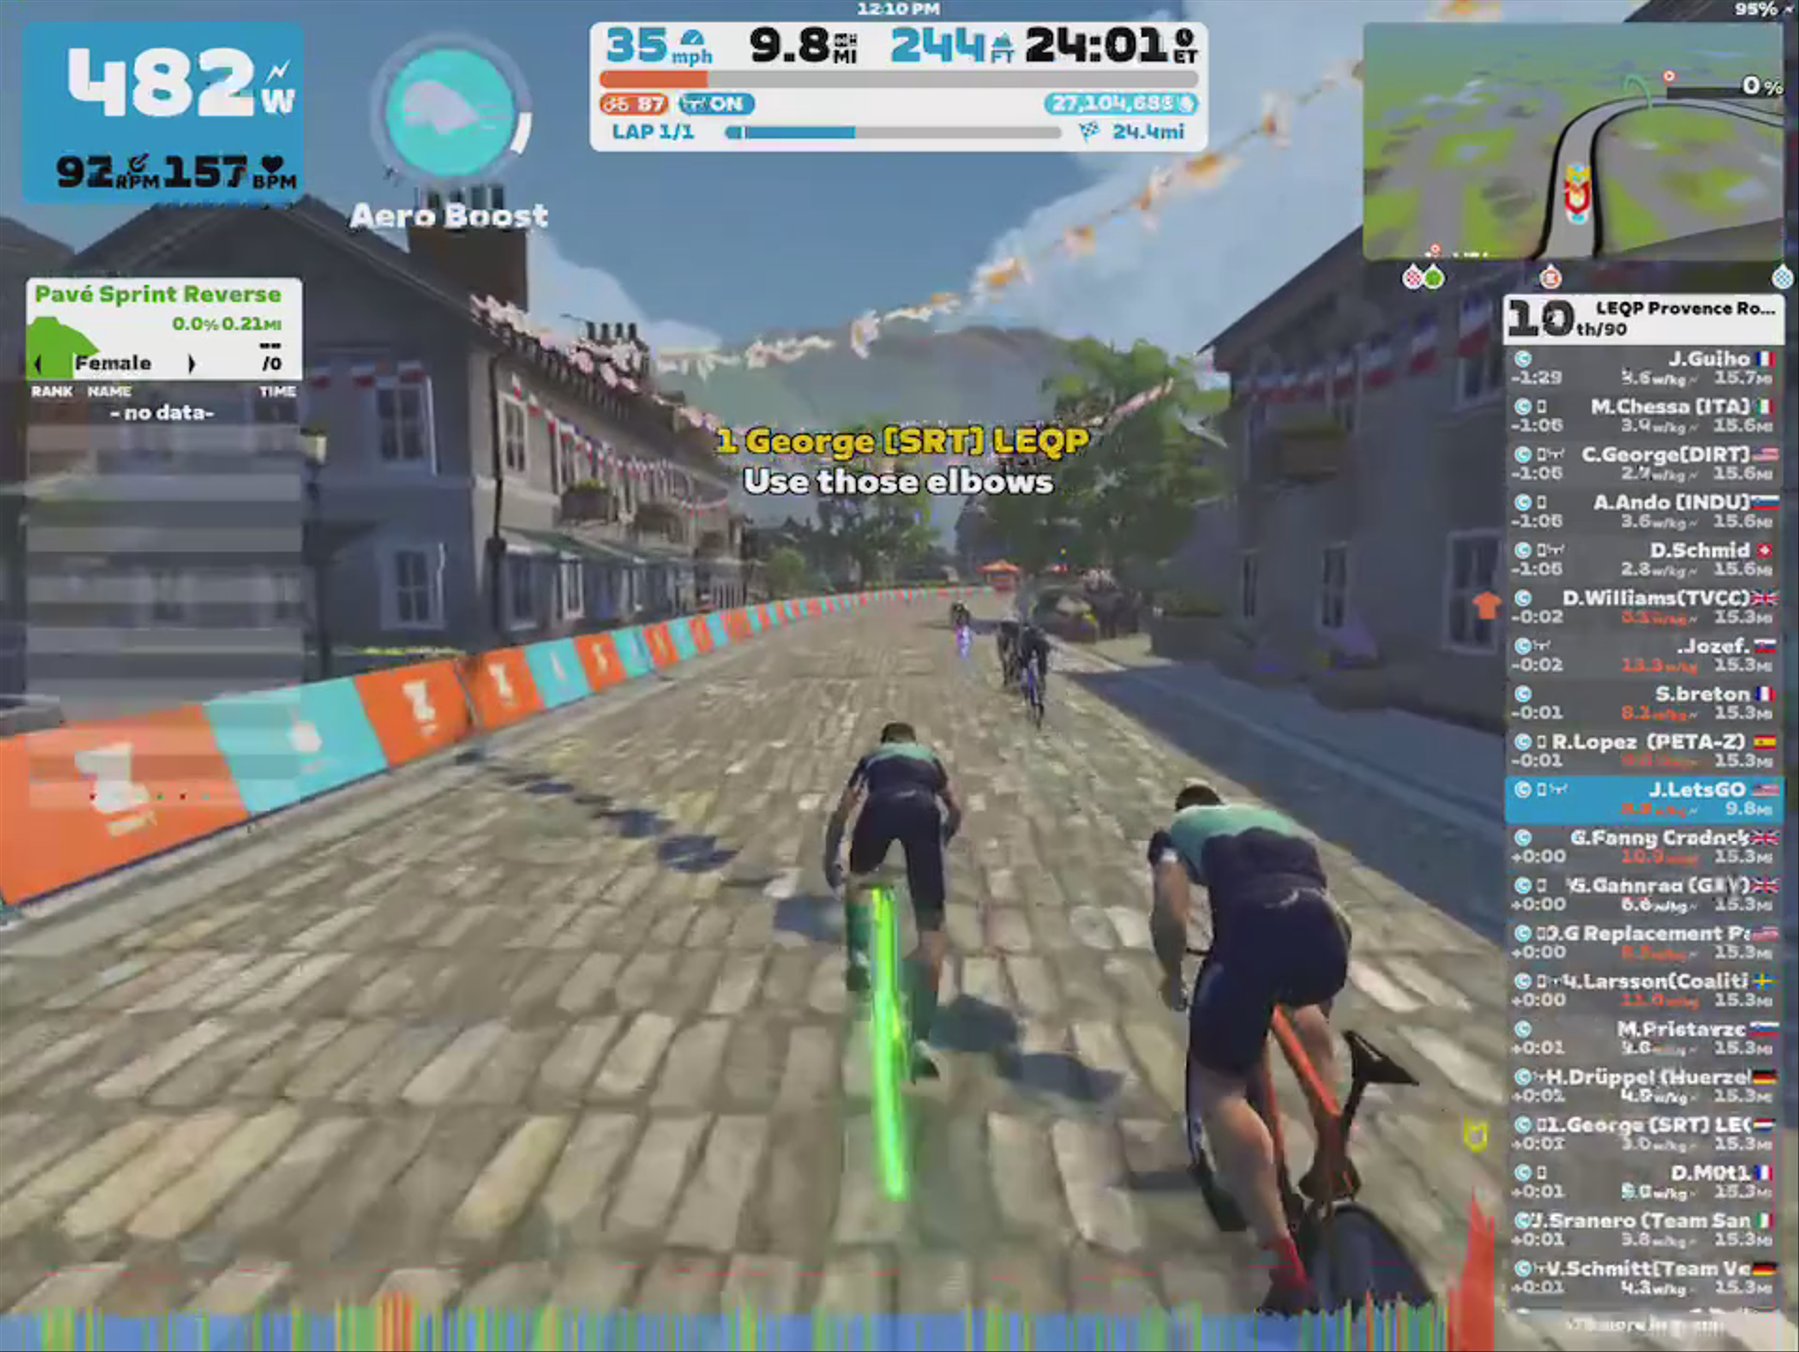 Zwift - Group Ride: LEQP Provence Rose Ride (C) on Tire-Bouchon in France